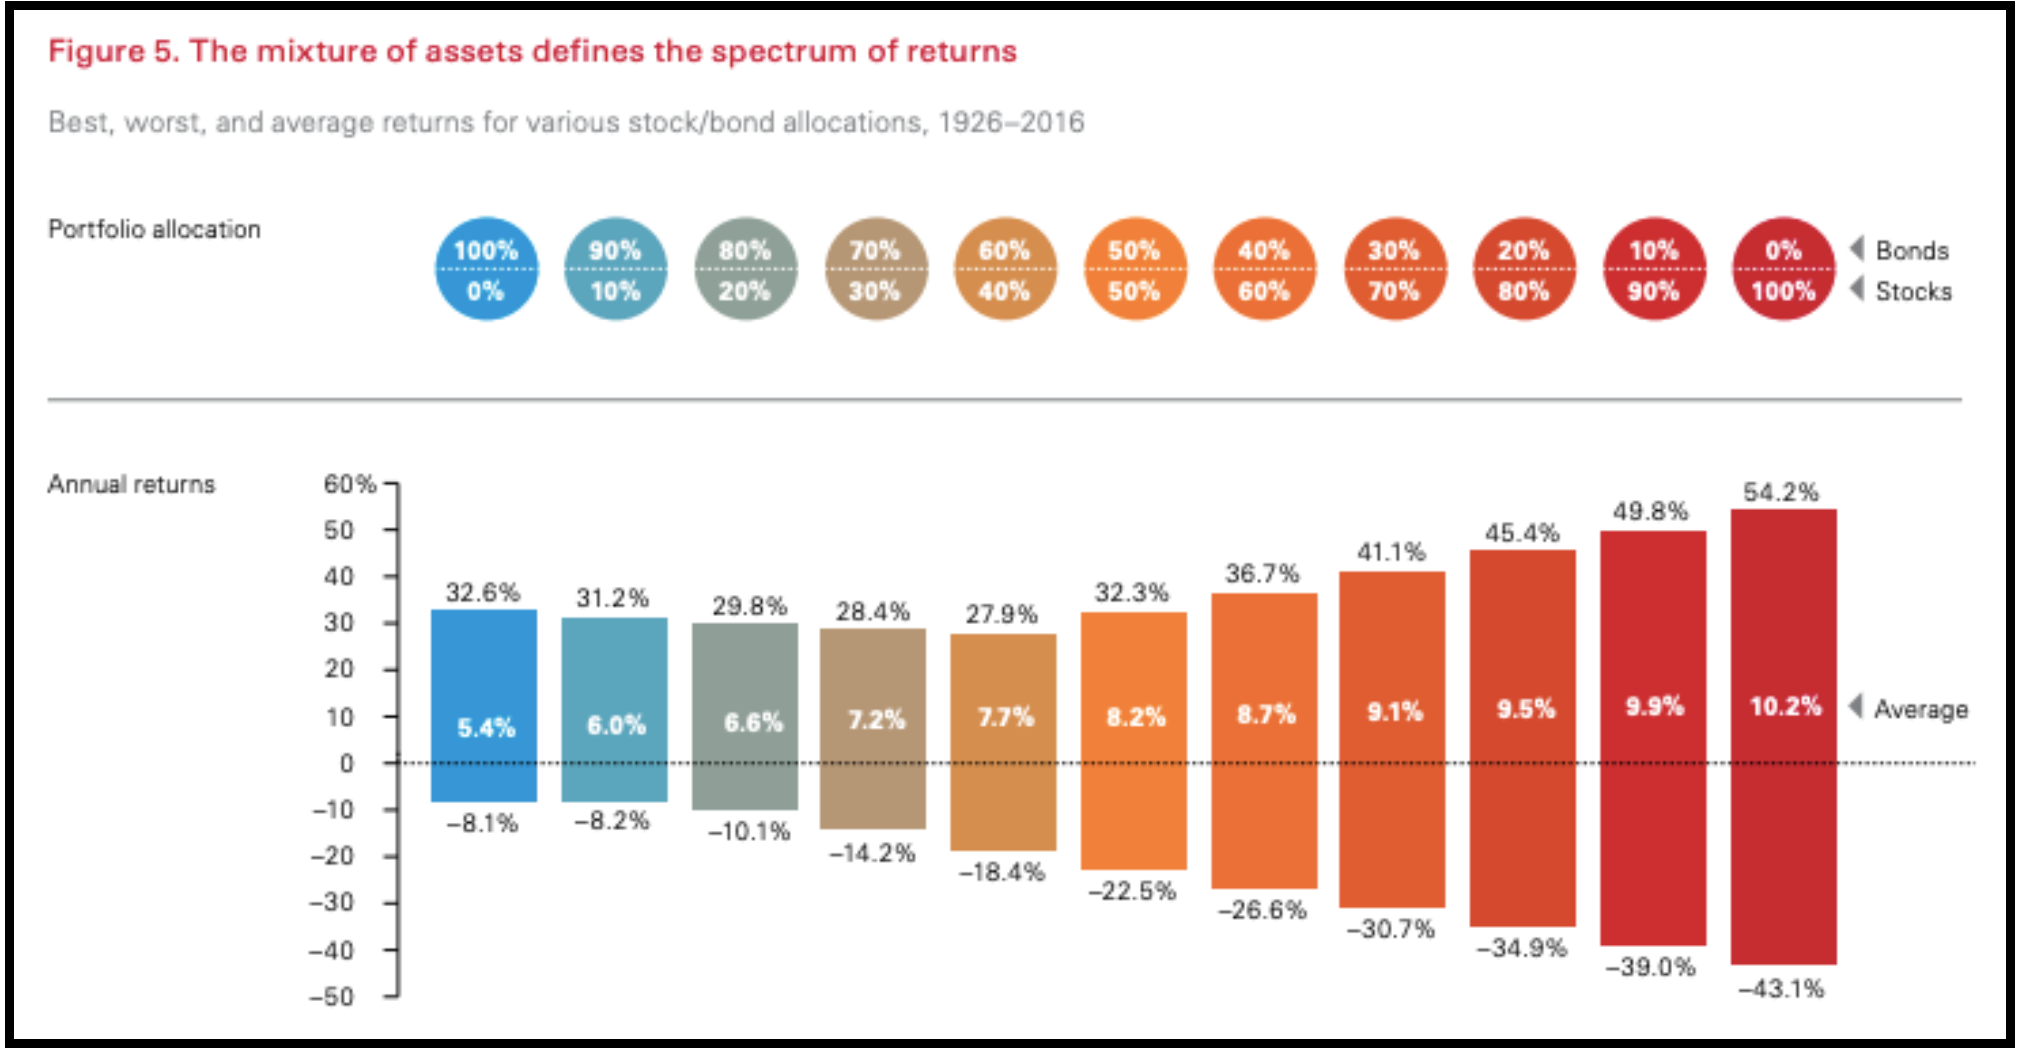 Figure 5. The mixture of assets defines the spectrum of returns
Best, worst, and average returns for various stock/bond allocations, 1926-2016
Portfolio allocation
100%
80%
10%
70%
30%
90%
60%
50%
40%
30%
20%
0%
Bonds
0%
10%
20%
40%
50%
60%
70%
80%
90%
100%
Stocks
Annual returns
60%
54.2%
49.8%
50
45.4%
41.1%
40
36.7%
32.6%
31.2%
32.3%
29.8%
28.4%
27.9%
30
20
10
7.2%
7.7%
8.2%
8.7%
9.1%
9.5%
9.9%
10.2%
Average
5.4%
6.0%
6.6%
-10
-8.1%
-8.2%
-10.1%
-20
-14.2%
-18.4%
-22.5%
-30
-26.6%
-30.7%
-40
-34.9%
-39.0%
-50
-43.1%
